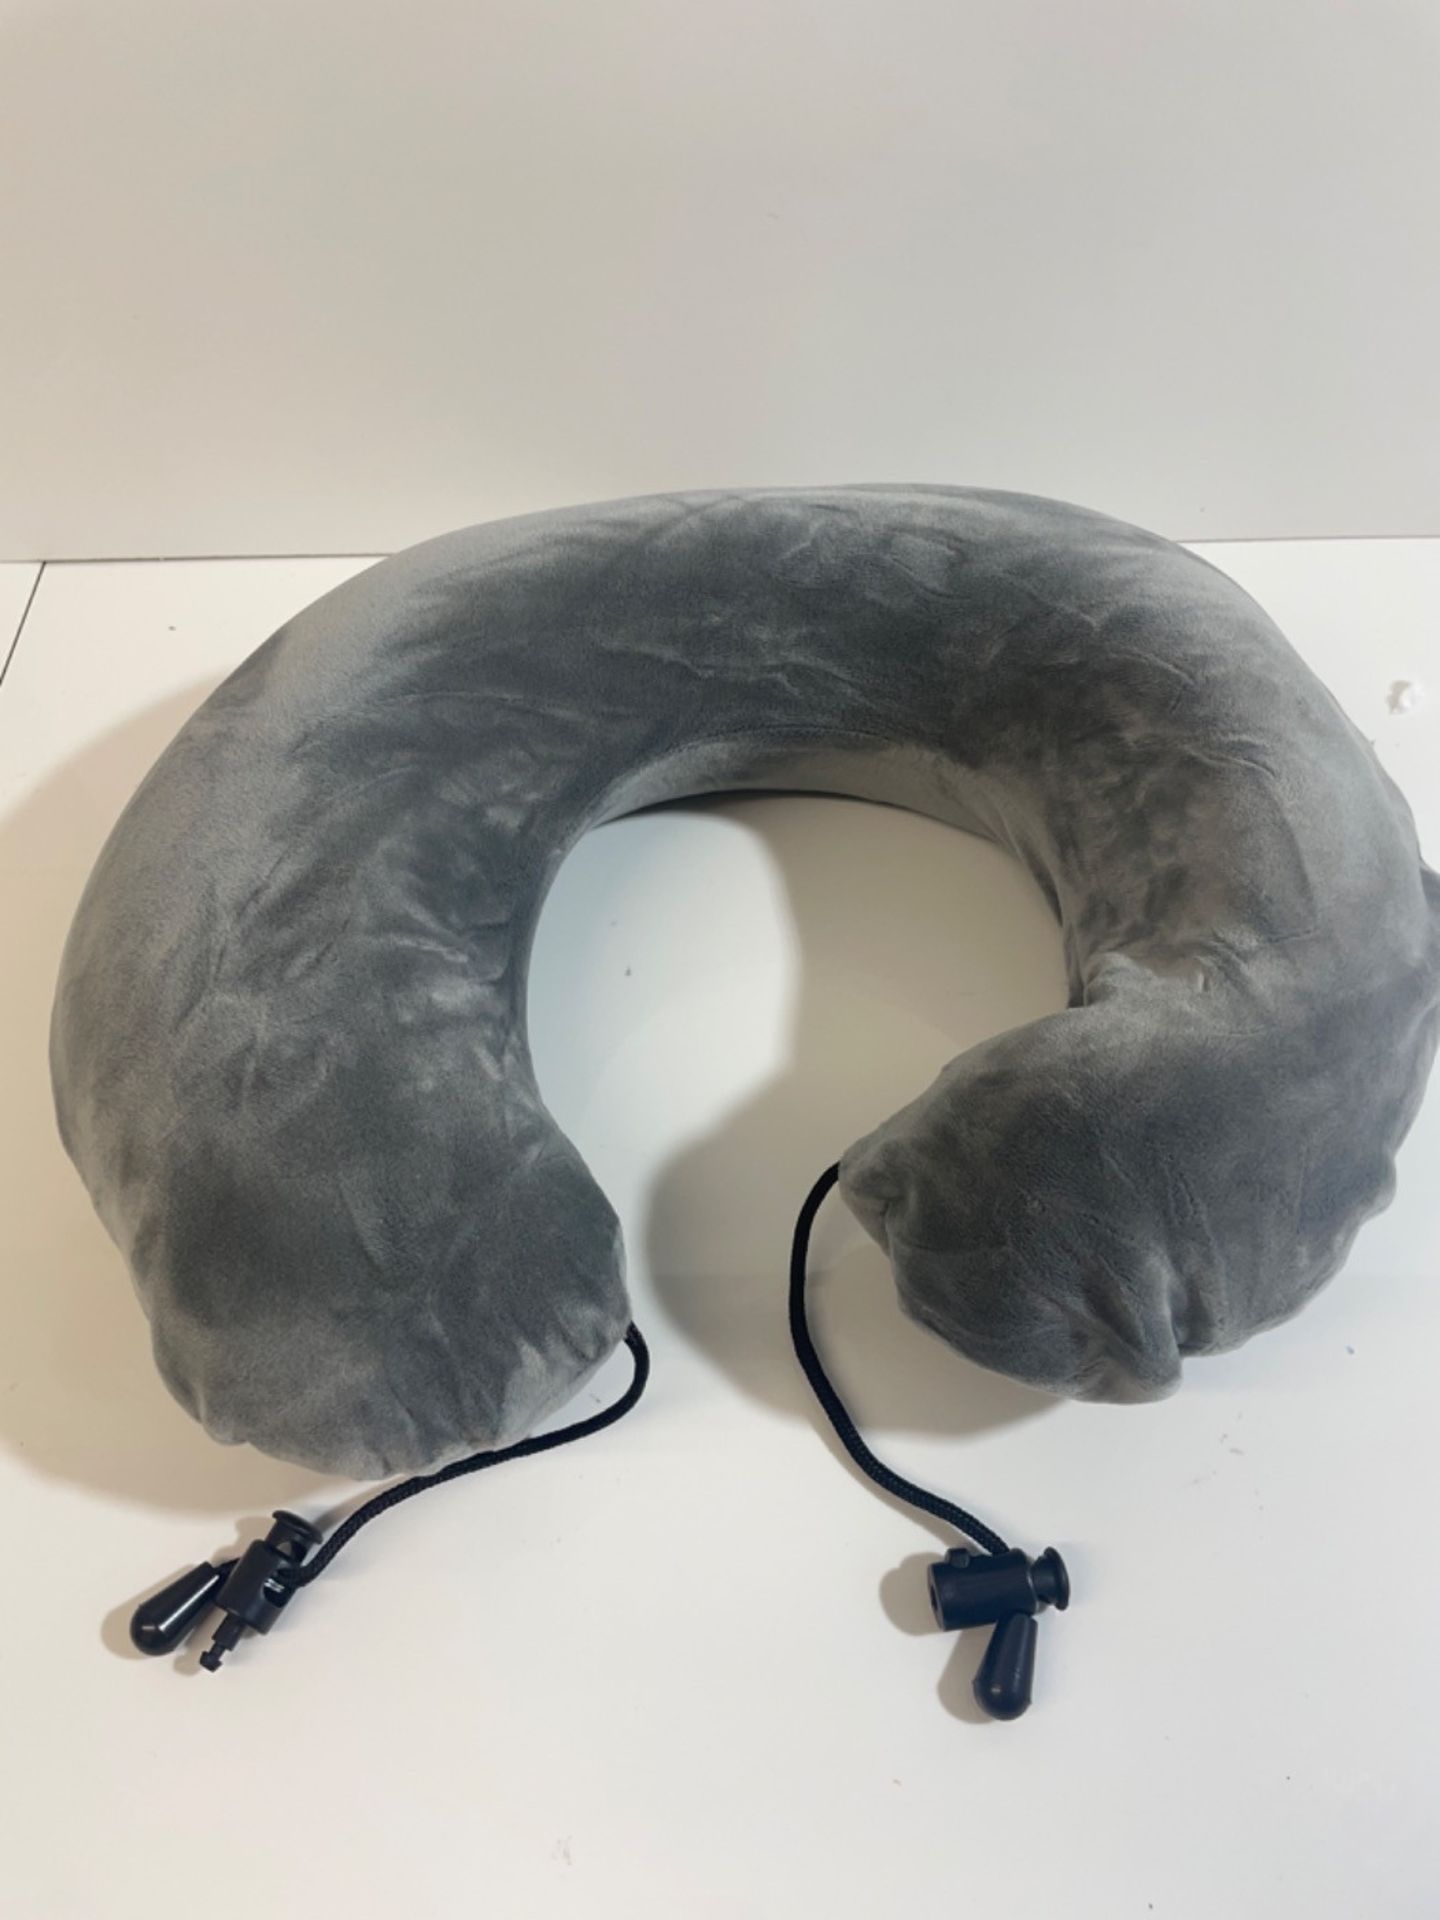 Travel Pillow Memory Foam Neck Pillow Lightweight Quick Pack for Travel Camping Neck Support Pillow - Image 2 of 3